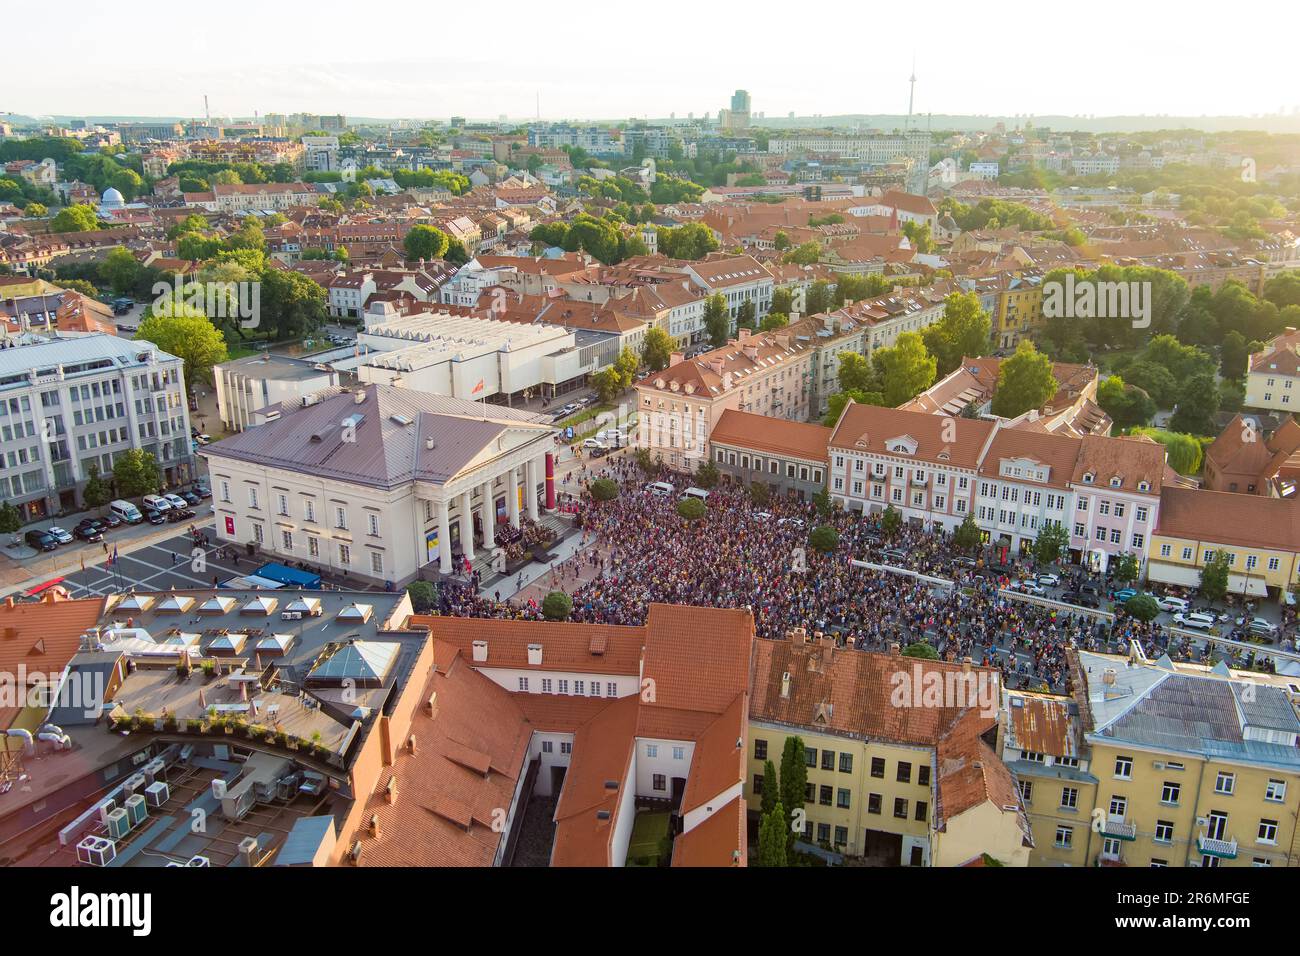 Aerial view of crowds celebrating Lithuanian Statehood Day. Lots of people singing national anthem of Lithuania on Town Hall square. Stock Photo